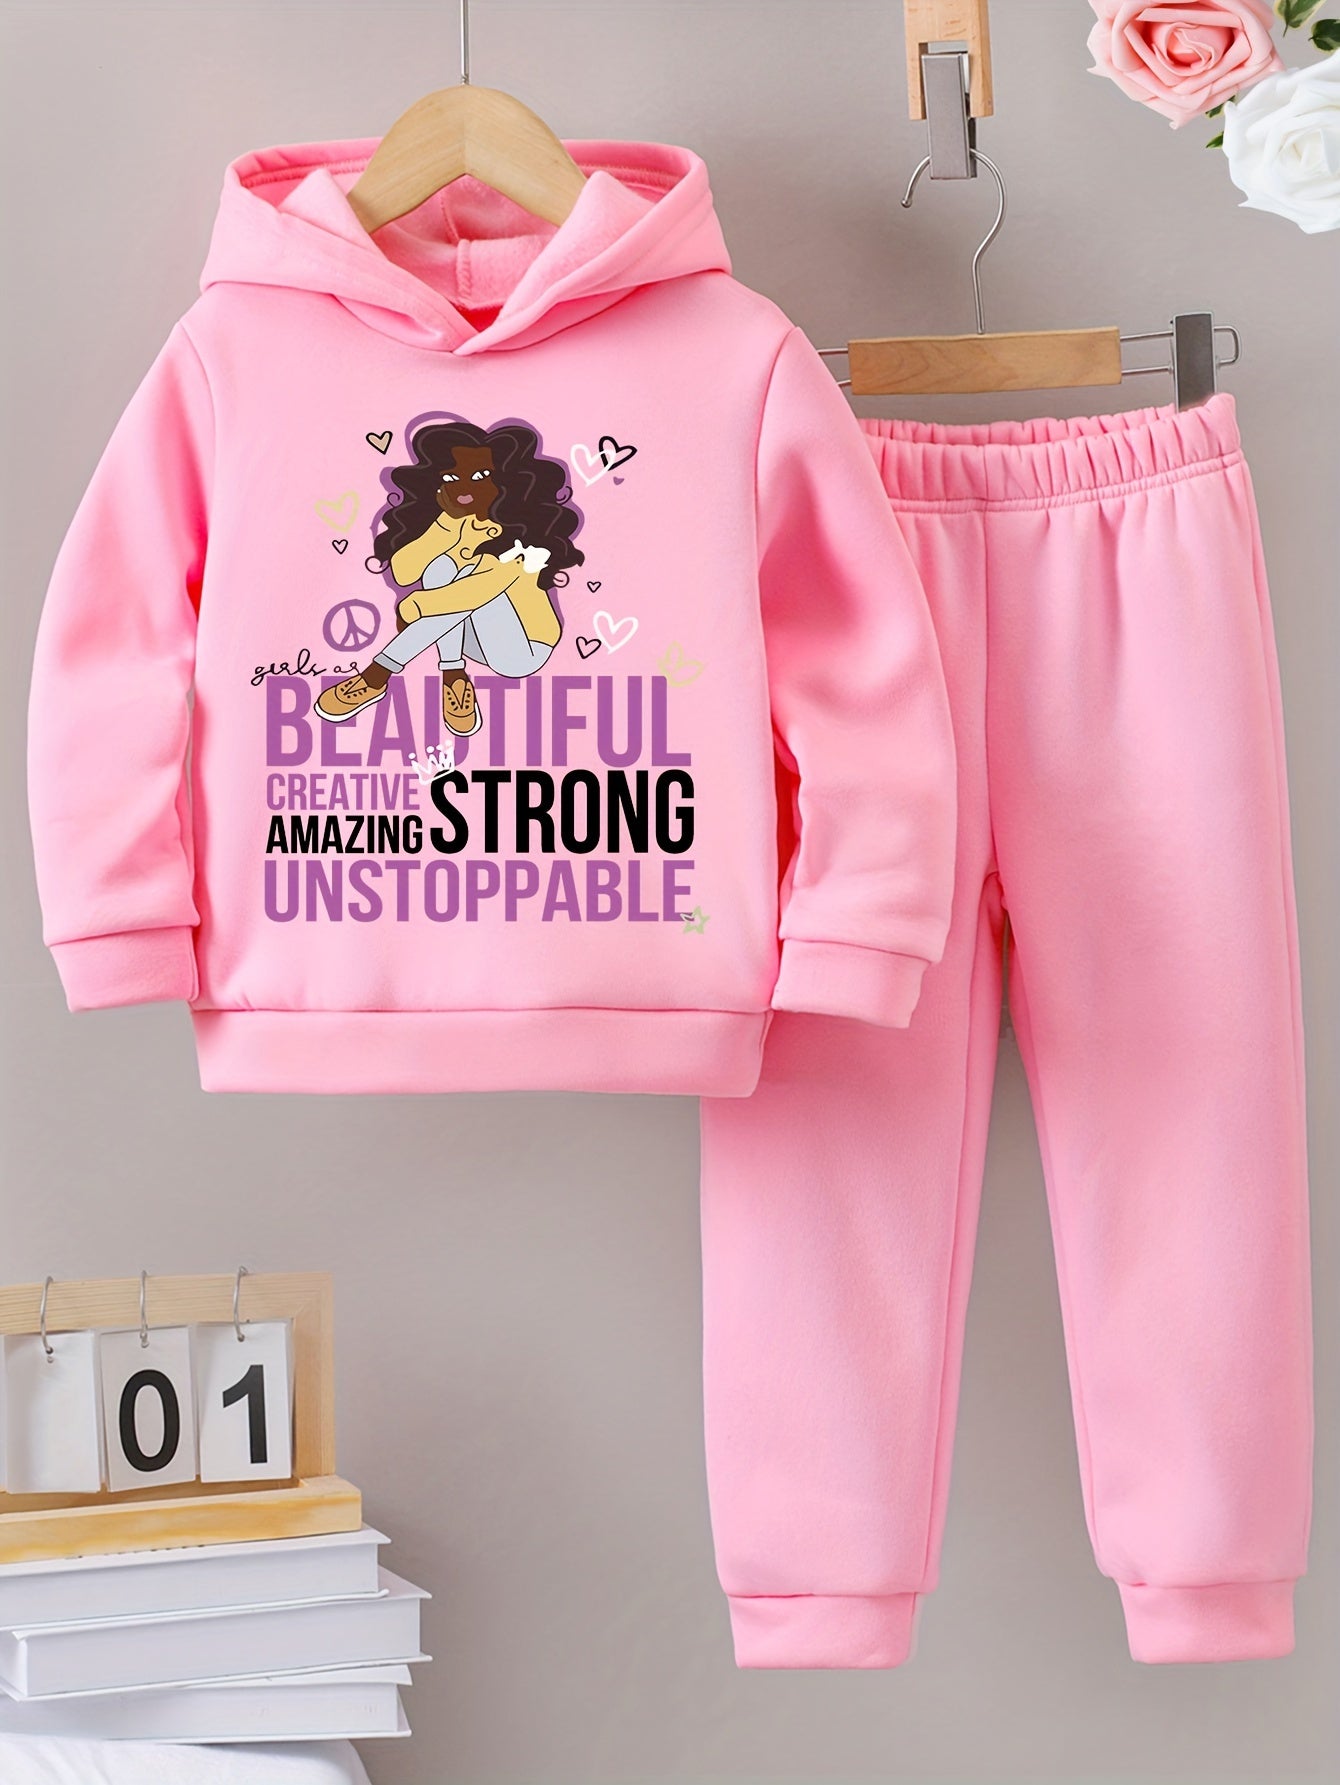 Beautiful Strong Unstoppable Youth Christian Casual Outfit claimedbygoddesigns